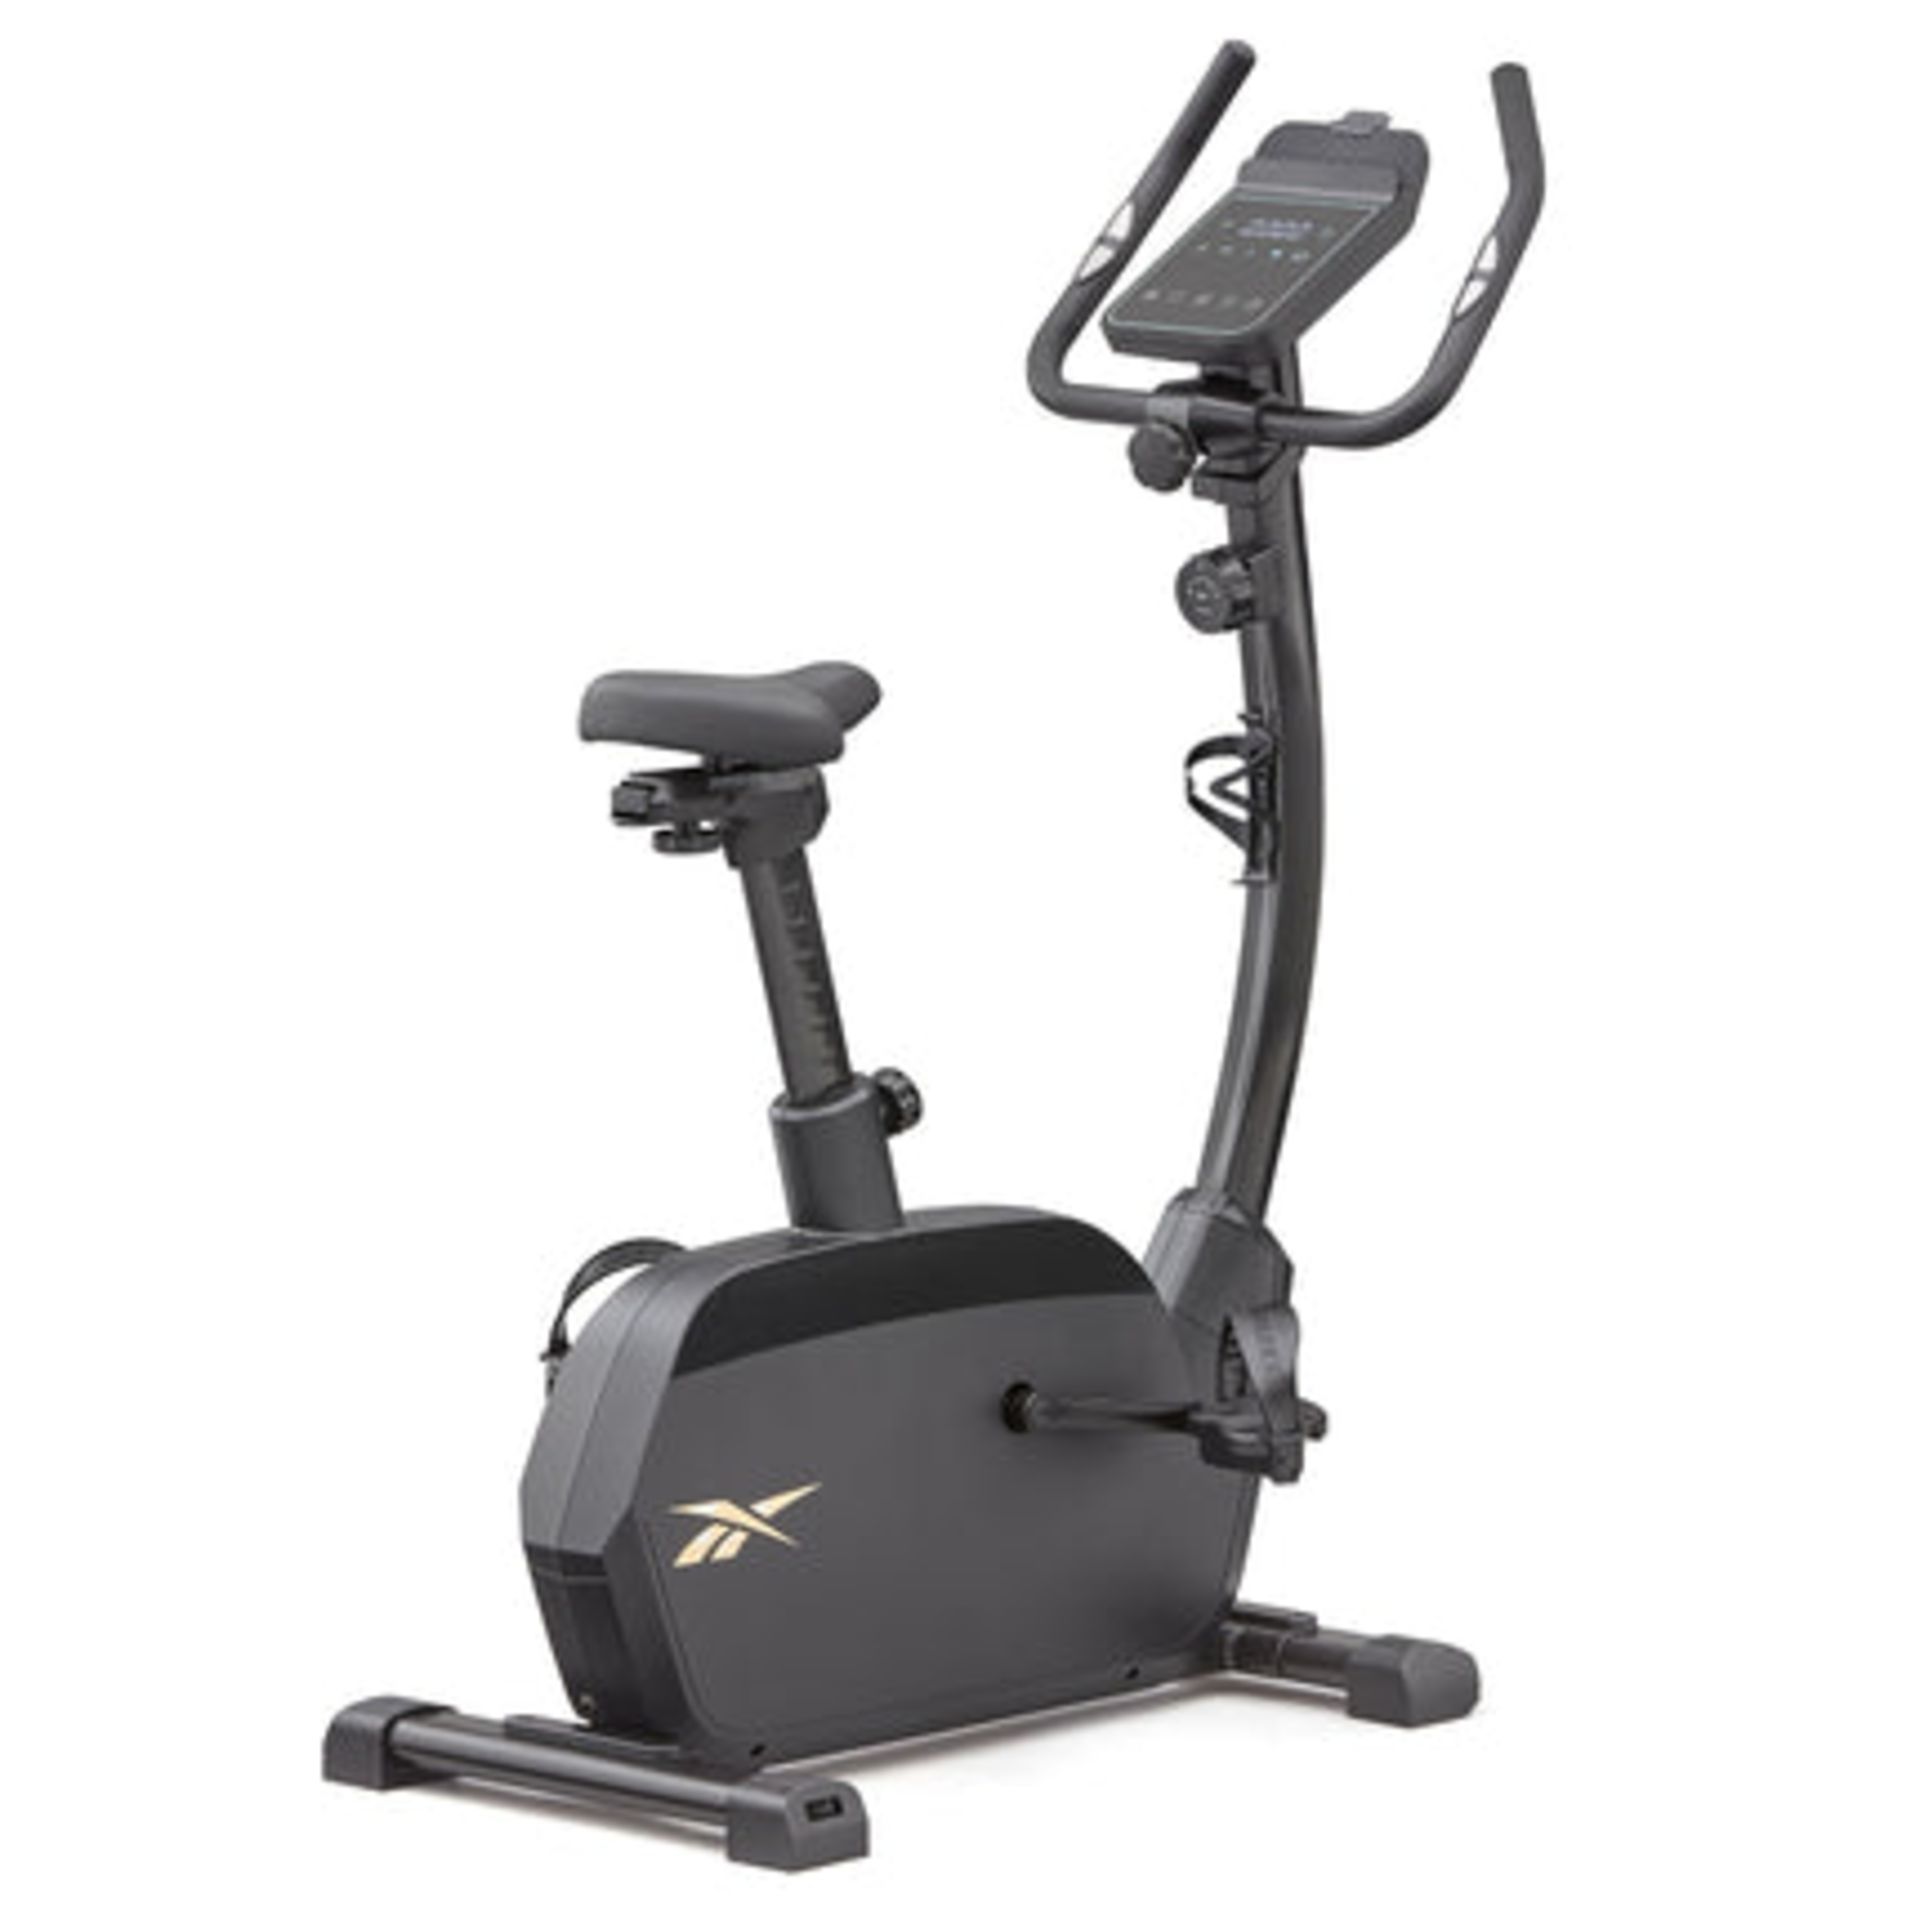 Reebok FR20 Exercise Bike - Black RRP 400 About the Product(s) Reebok FR20 Exercise Bike